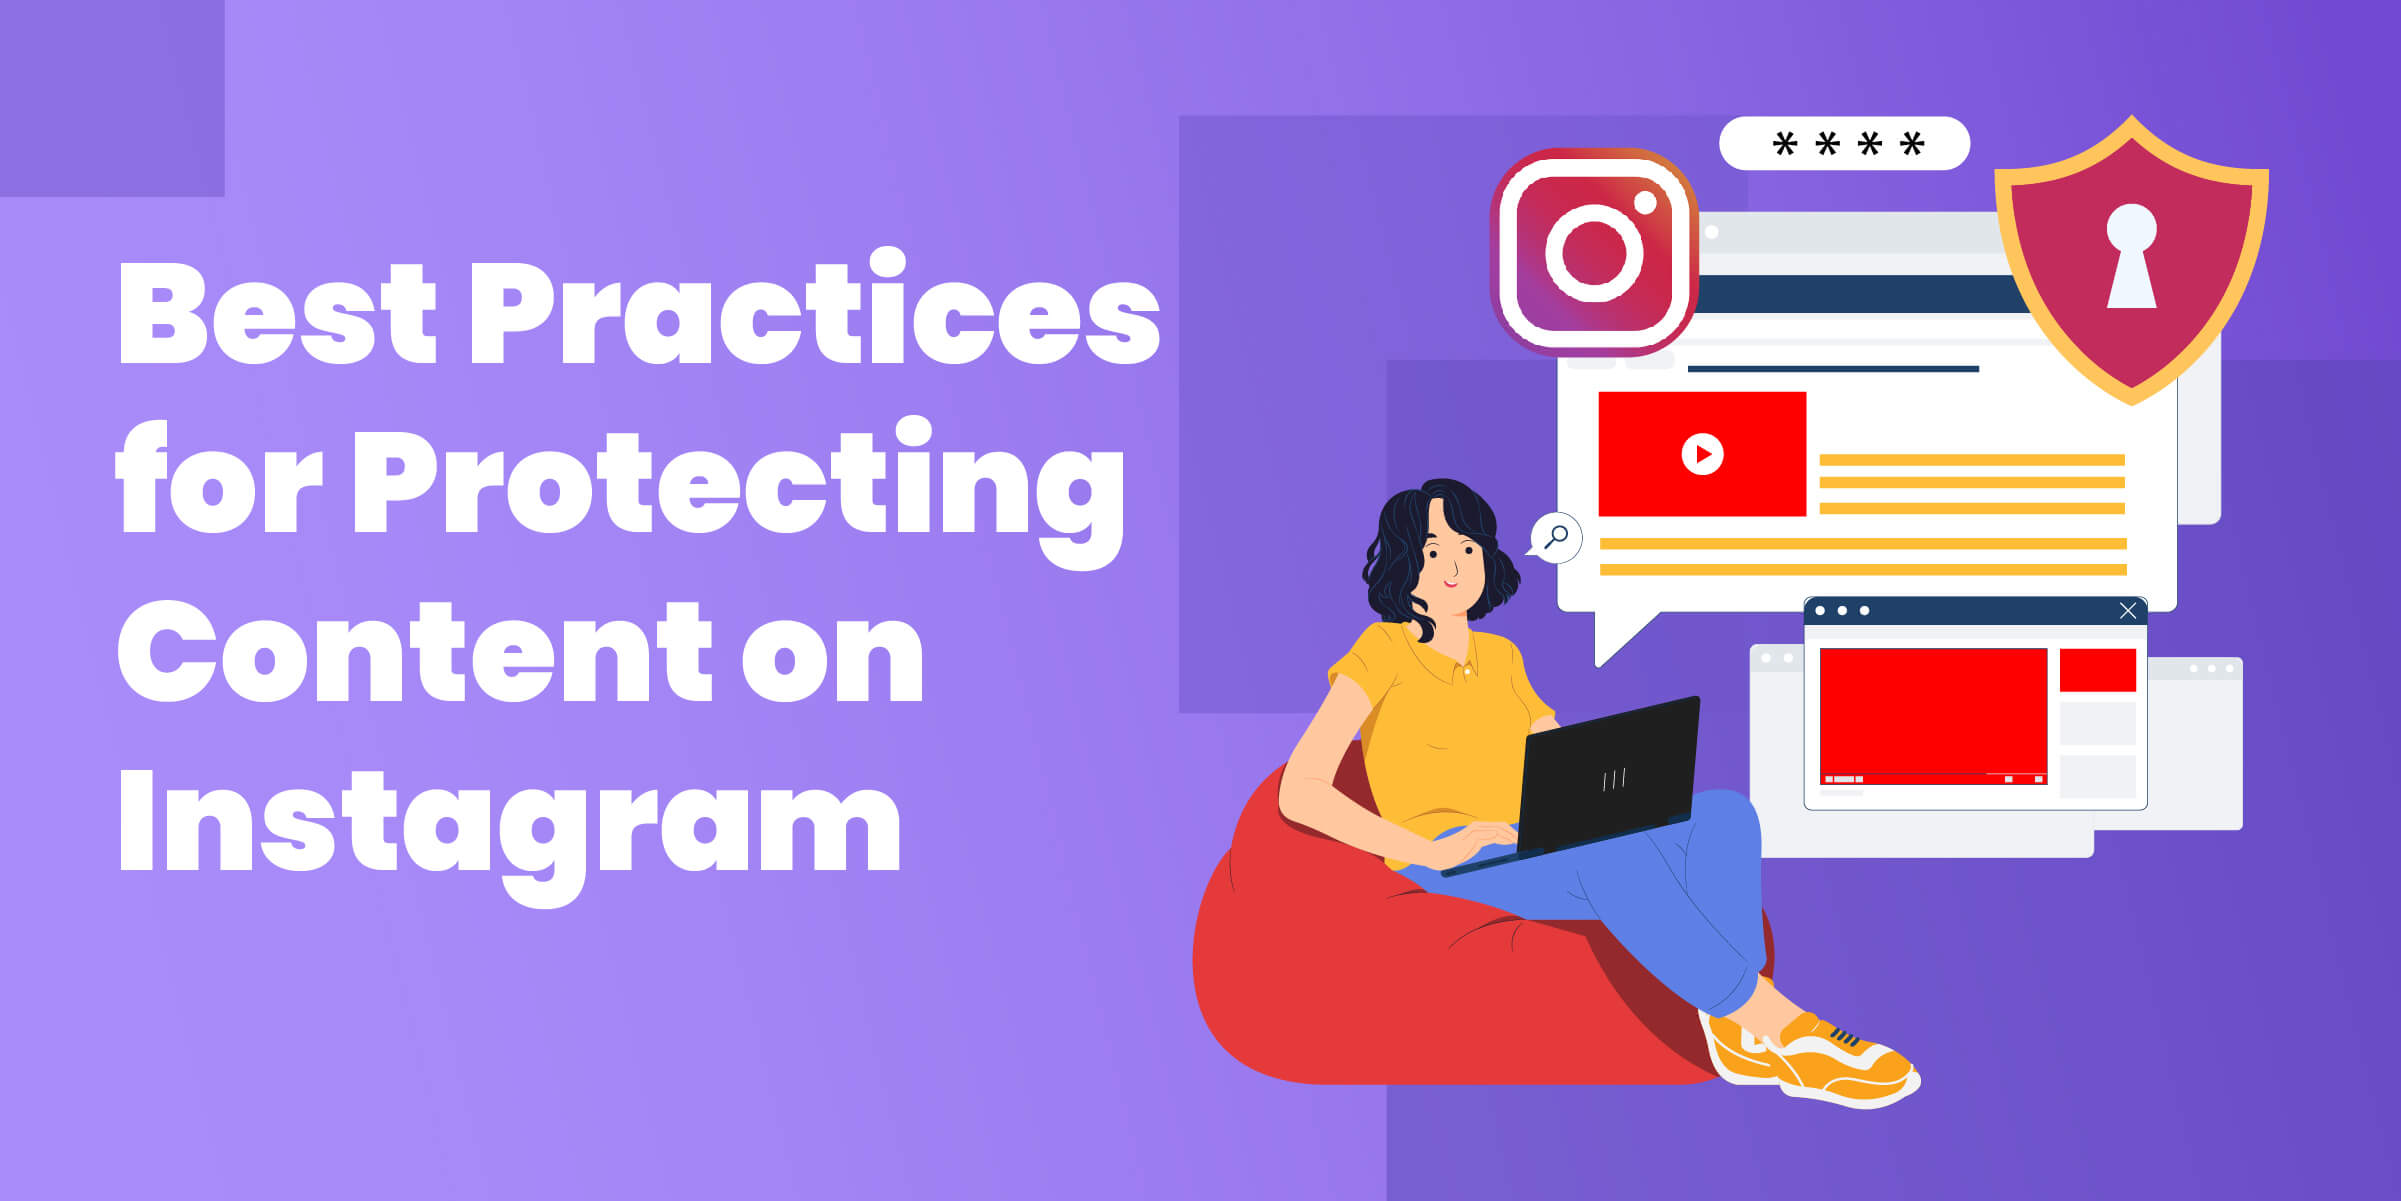 Best Practices for Protecting Content on Instagram